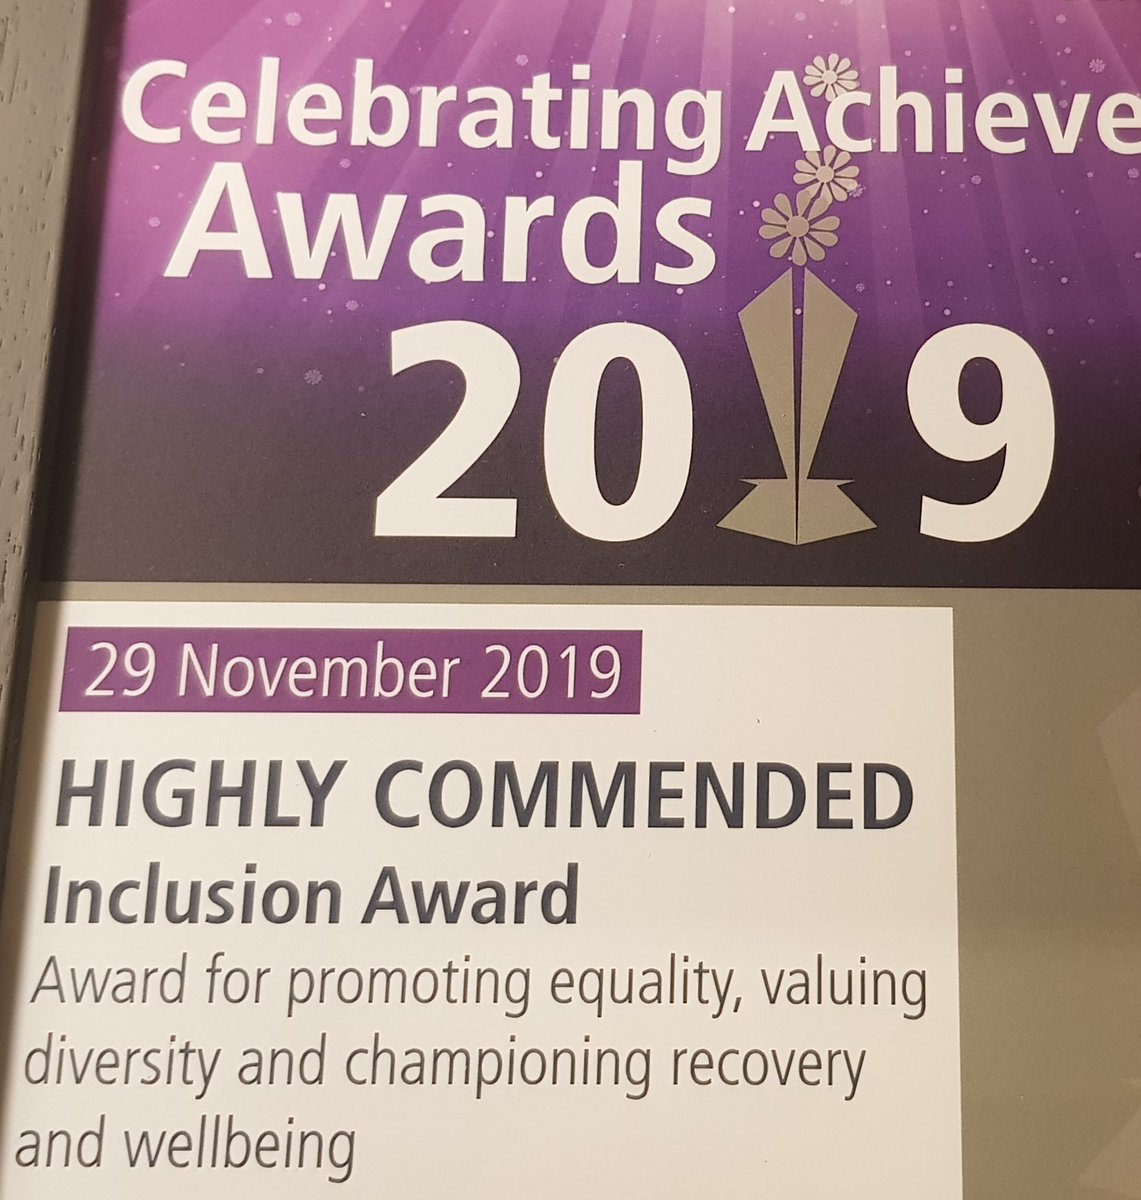 Lovely afternoon celebrating the achievements of many staff and teams in @DPT_NHS. It was also lovely to be given this for the work the Equality Champions are doing in @DPT_TALKWORKS #ProudofDPT